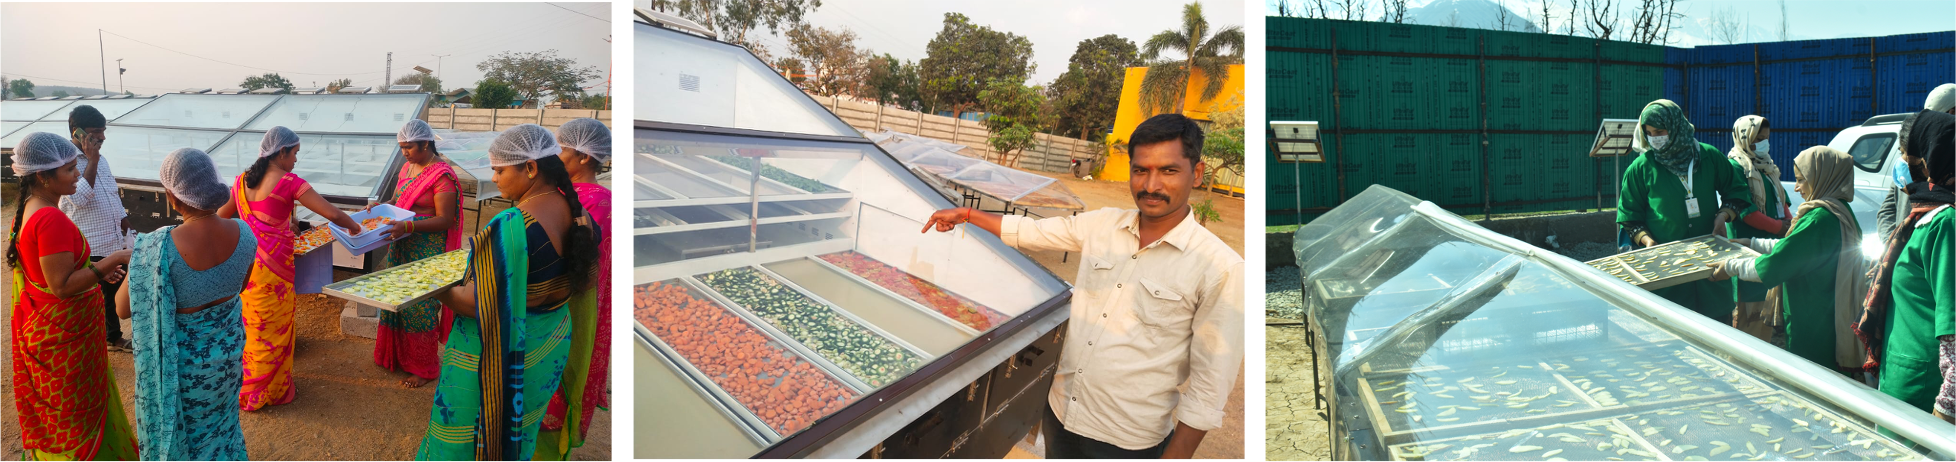 Our Solar Drying Projects in J&K and Telangana go live